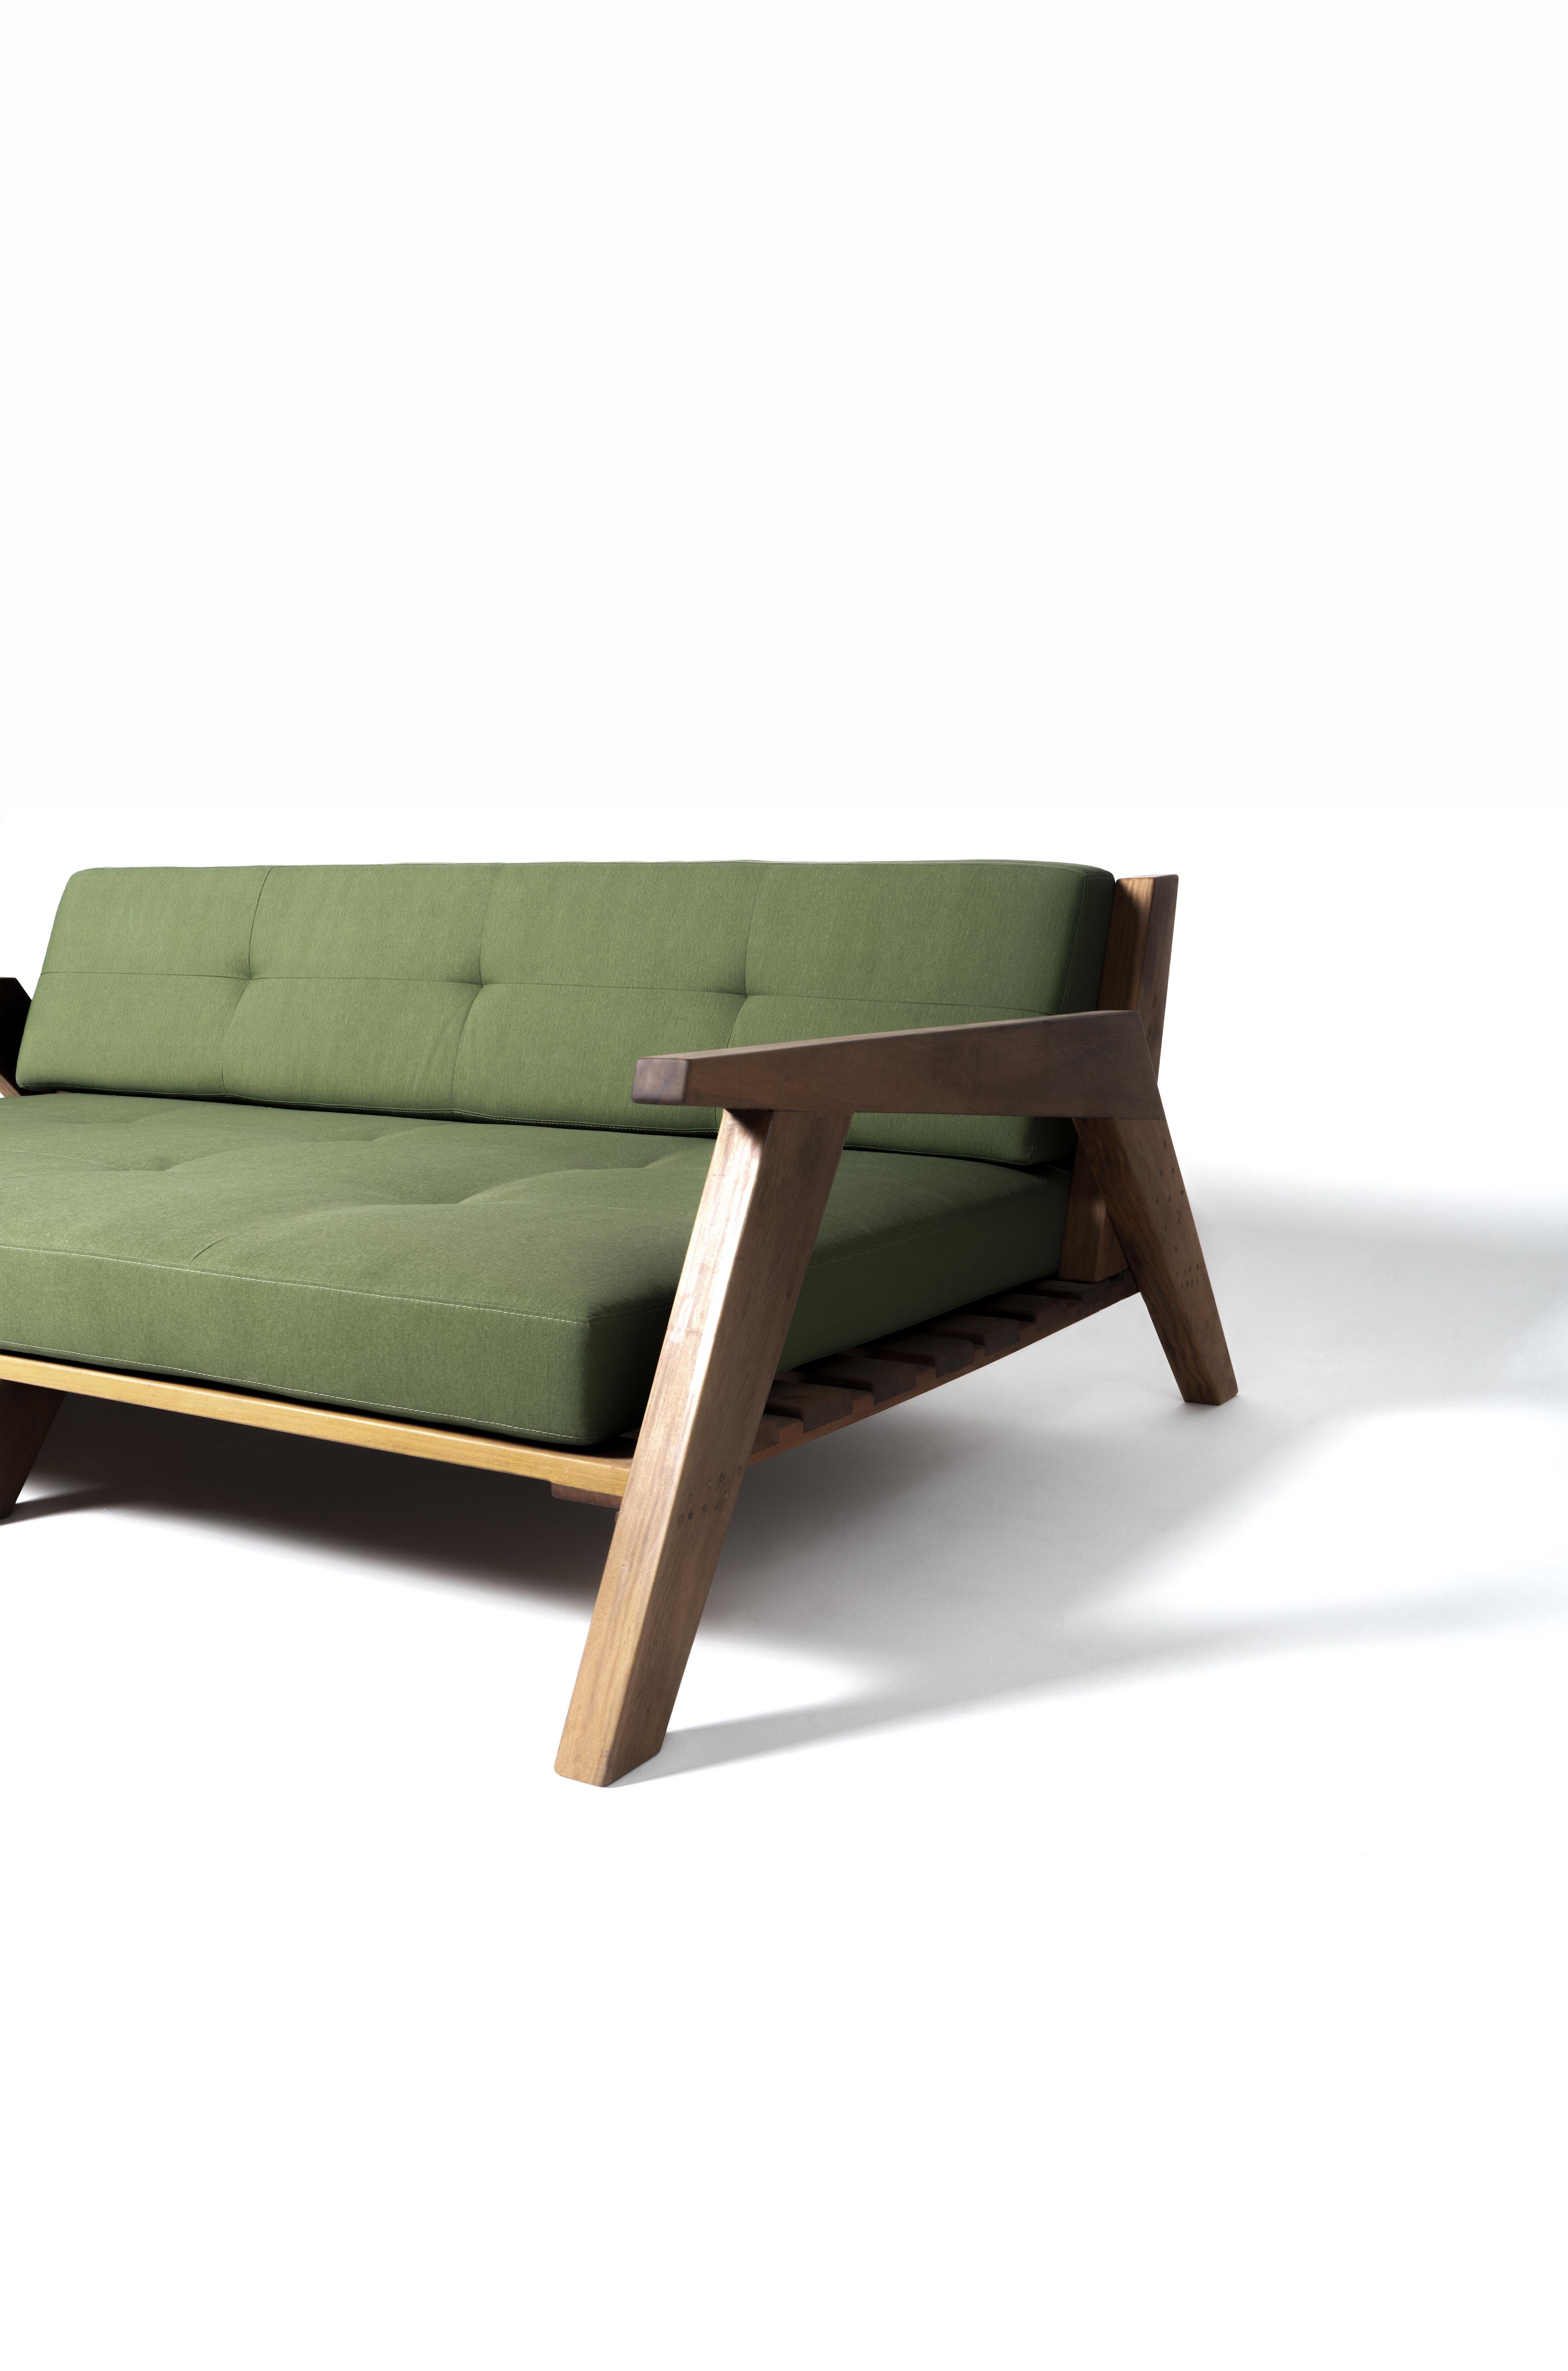 Sofa Chaise Caraíva by Dimitrih Correa is Presented by Dimitrih Correa

The piece is designed and handmade by Dimitrih Correa, a young designer and craftsman from Rio de Janeiro with a deep knowledge in the craftsmanship. Every piece is signed and